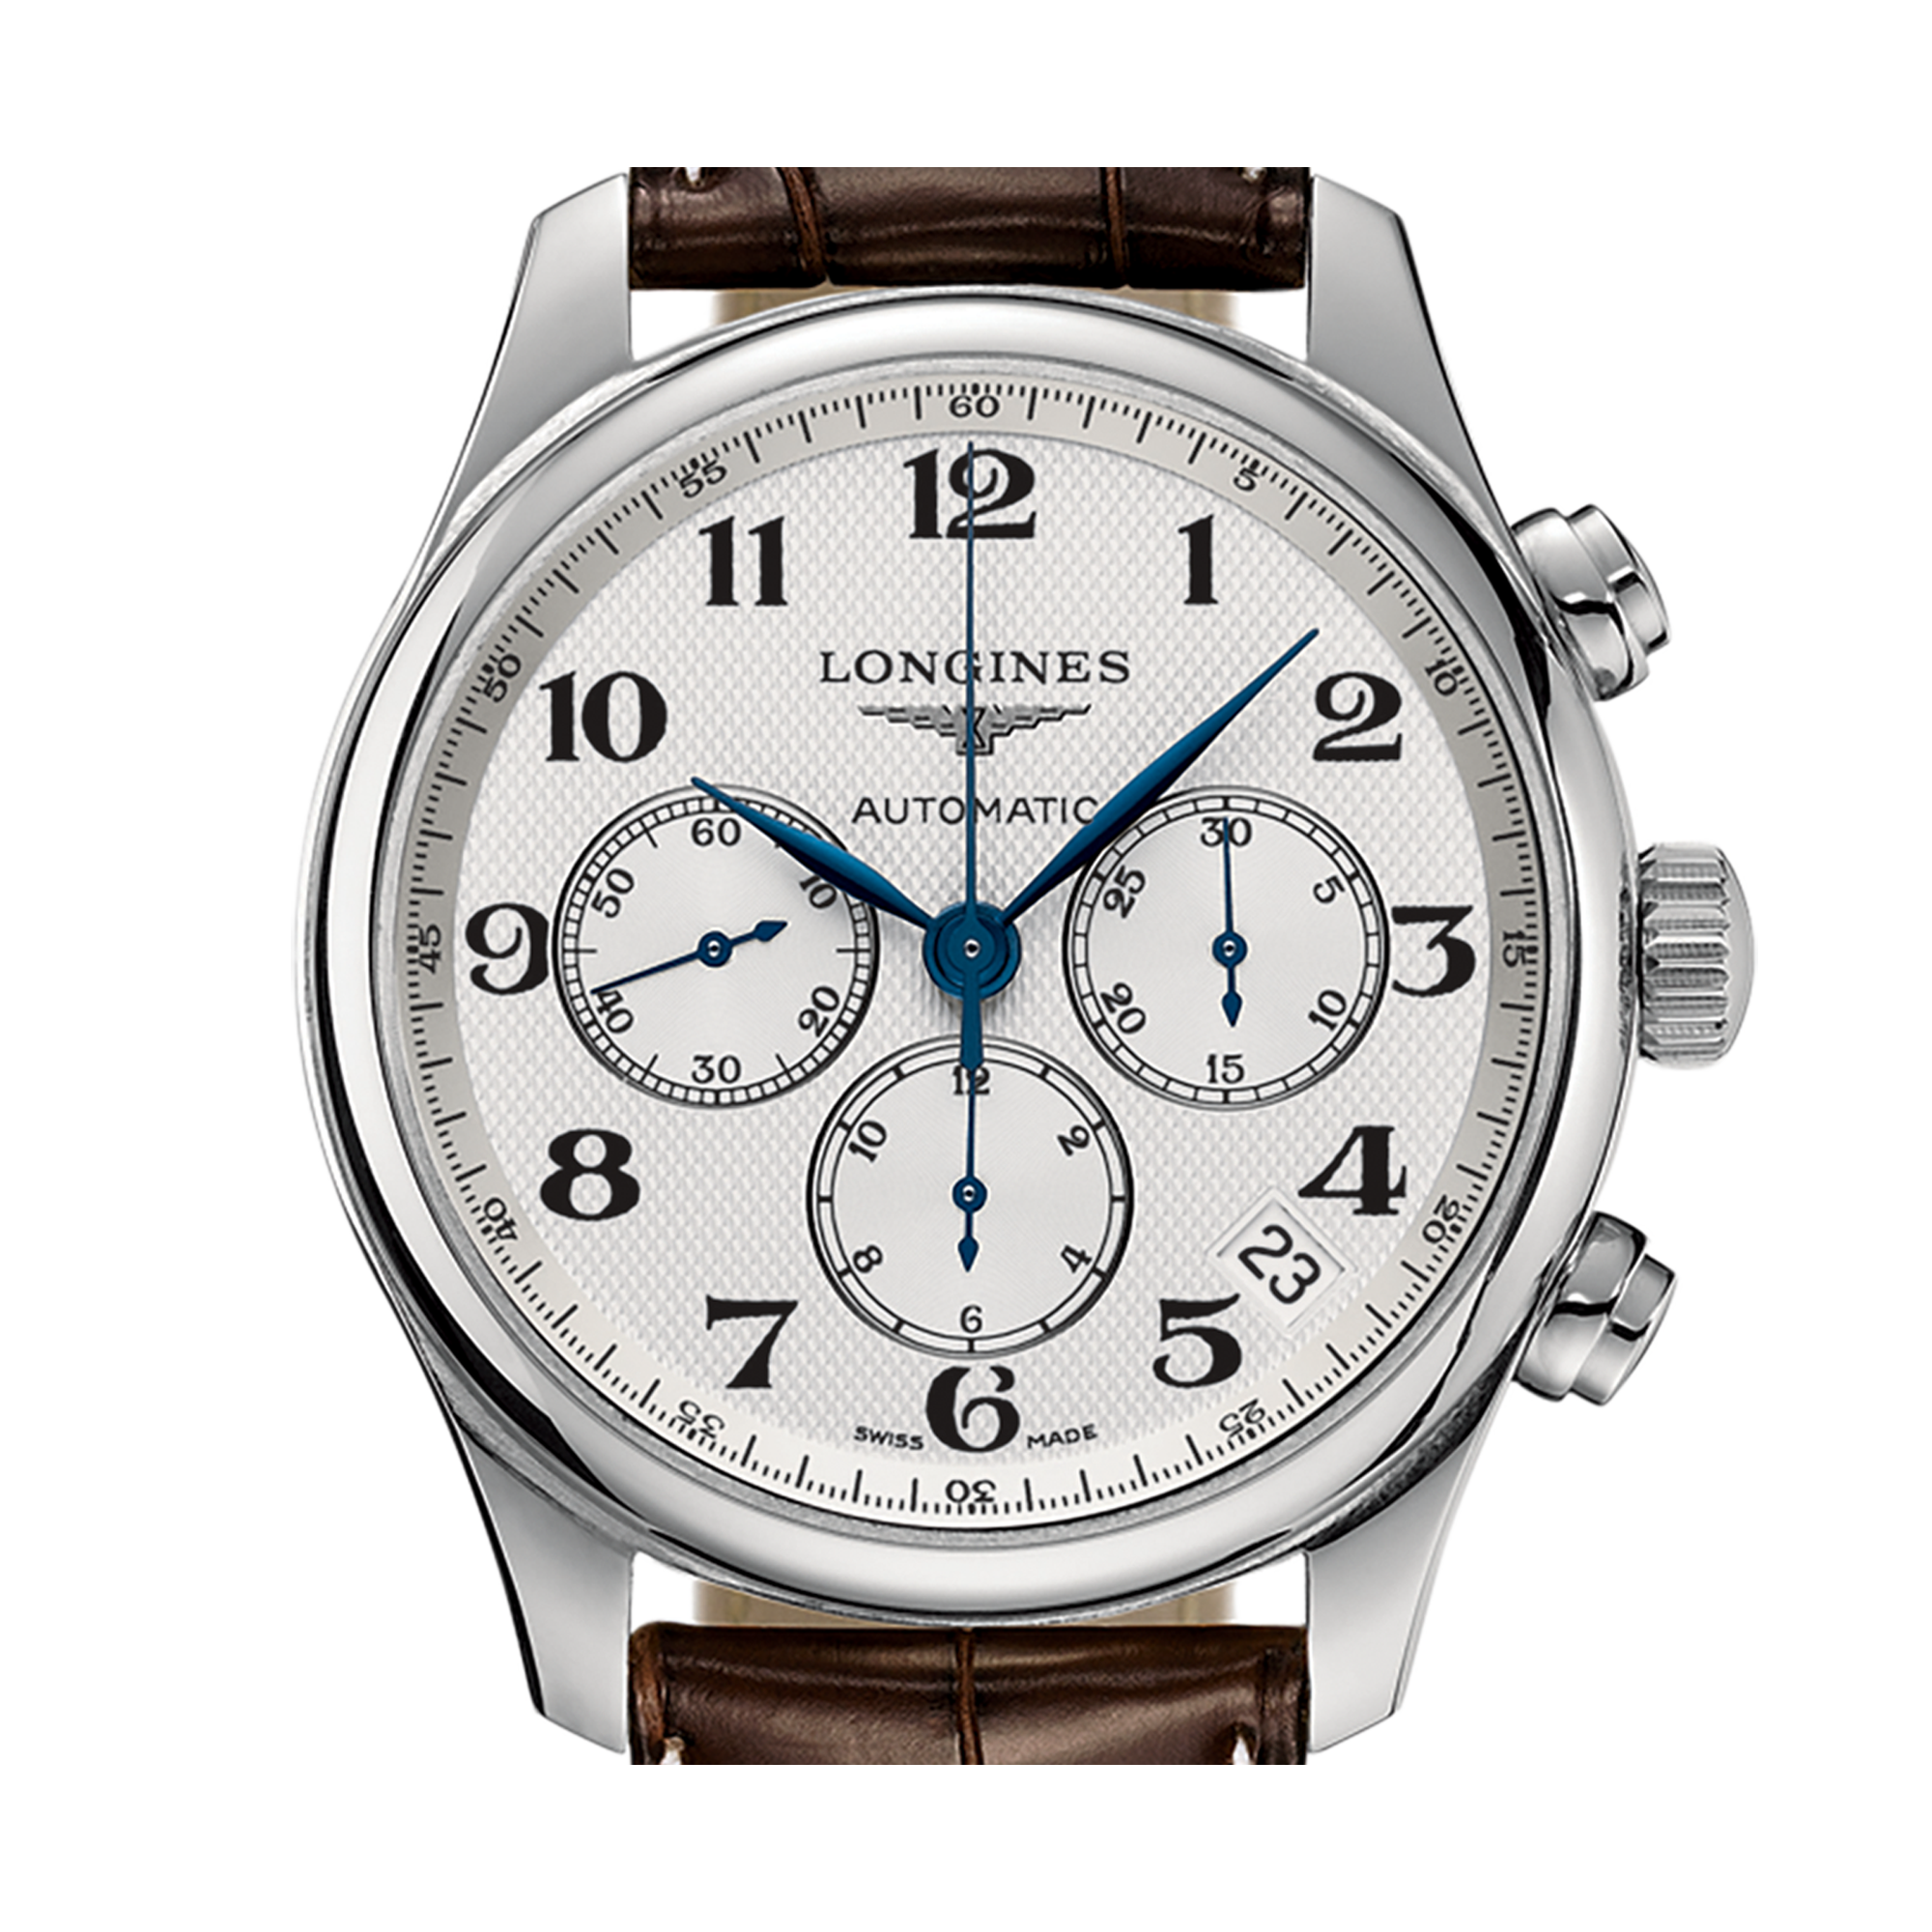 Longines The Longines Master Collection watch